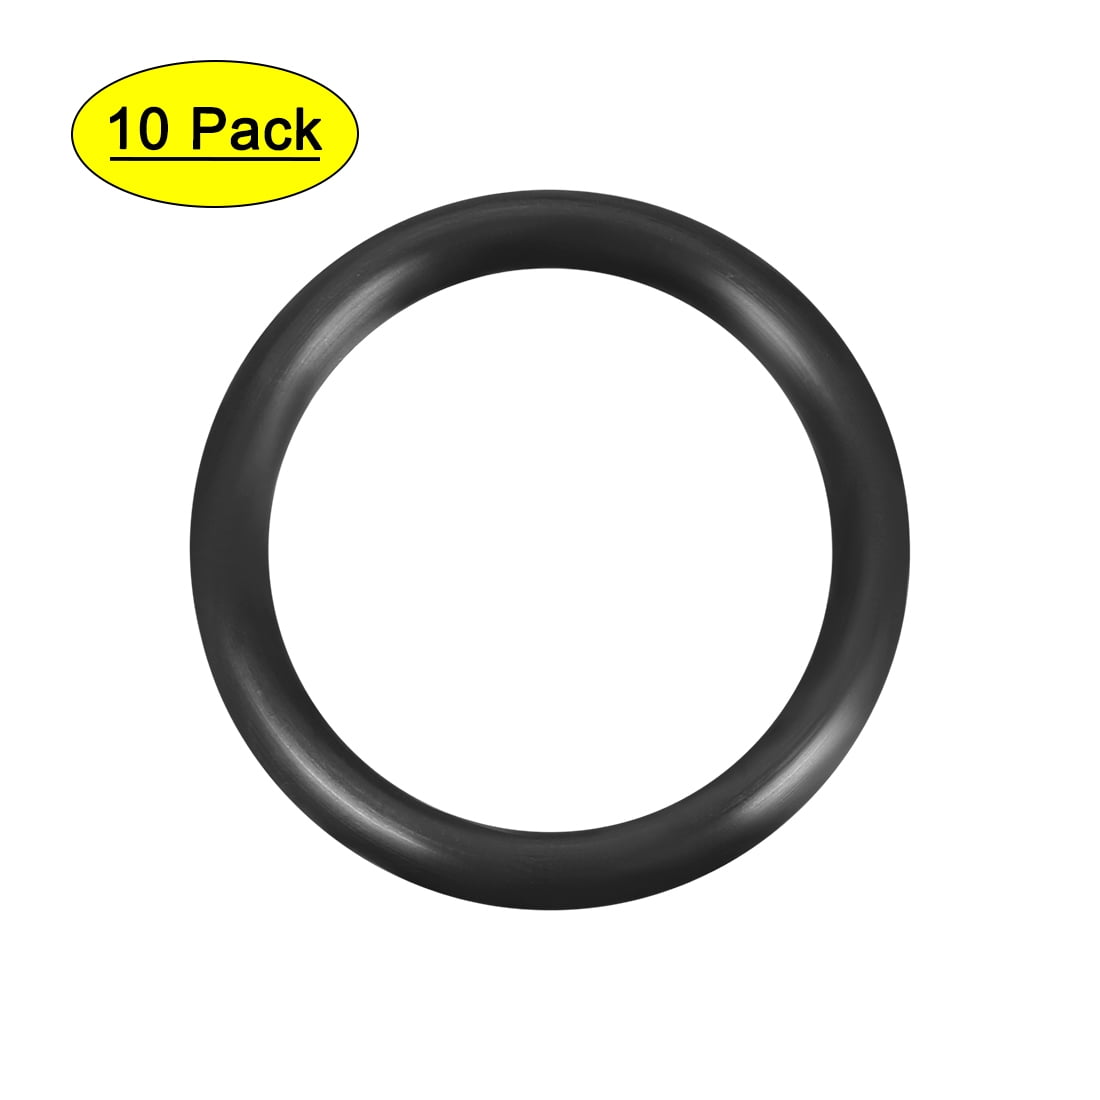 Pack of 10 O-Rings Nitrile Rubber Metric 45mm 